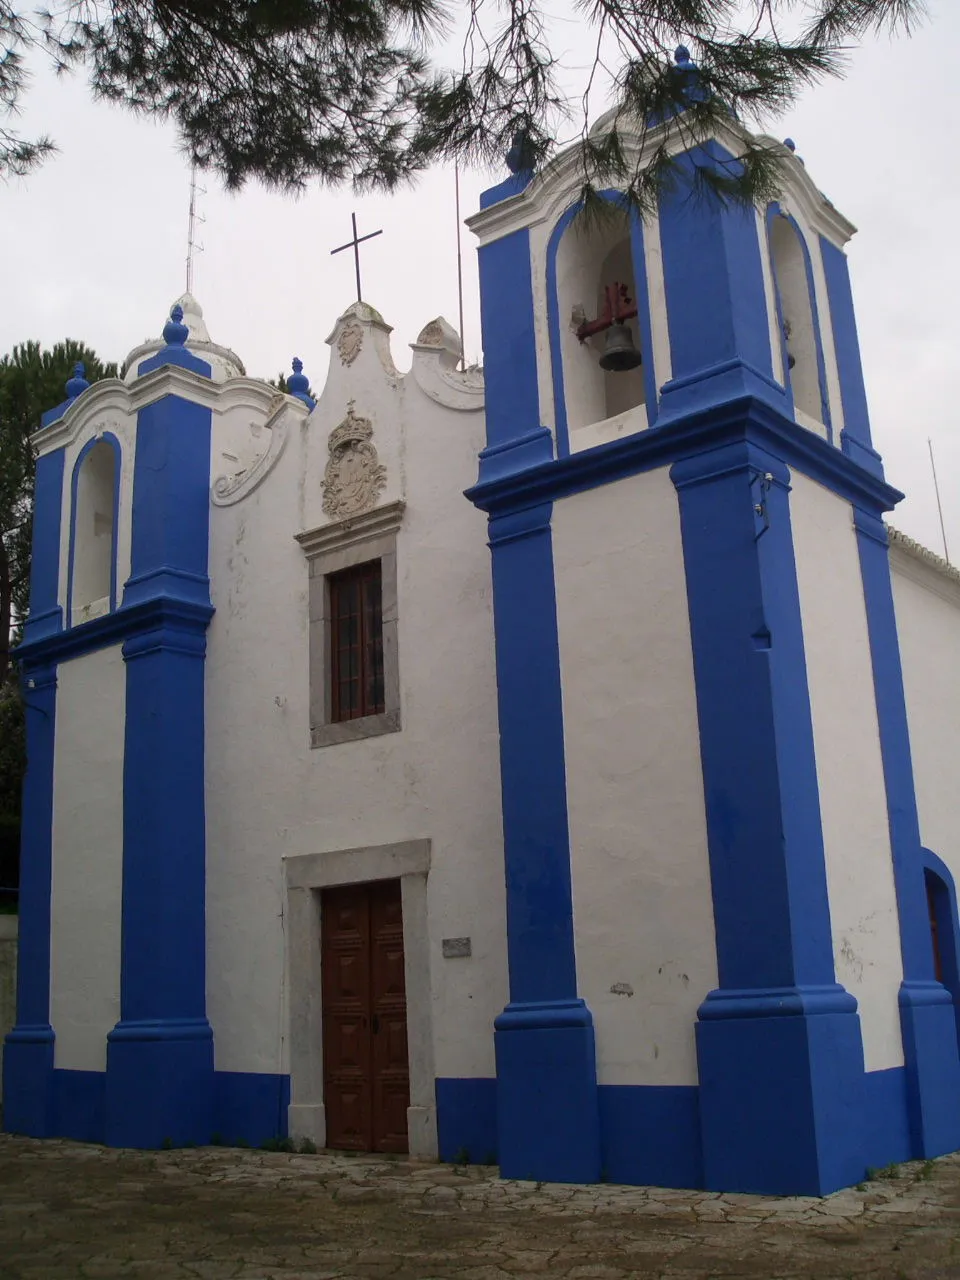 Photo showing: Church in Ourique, Portugal